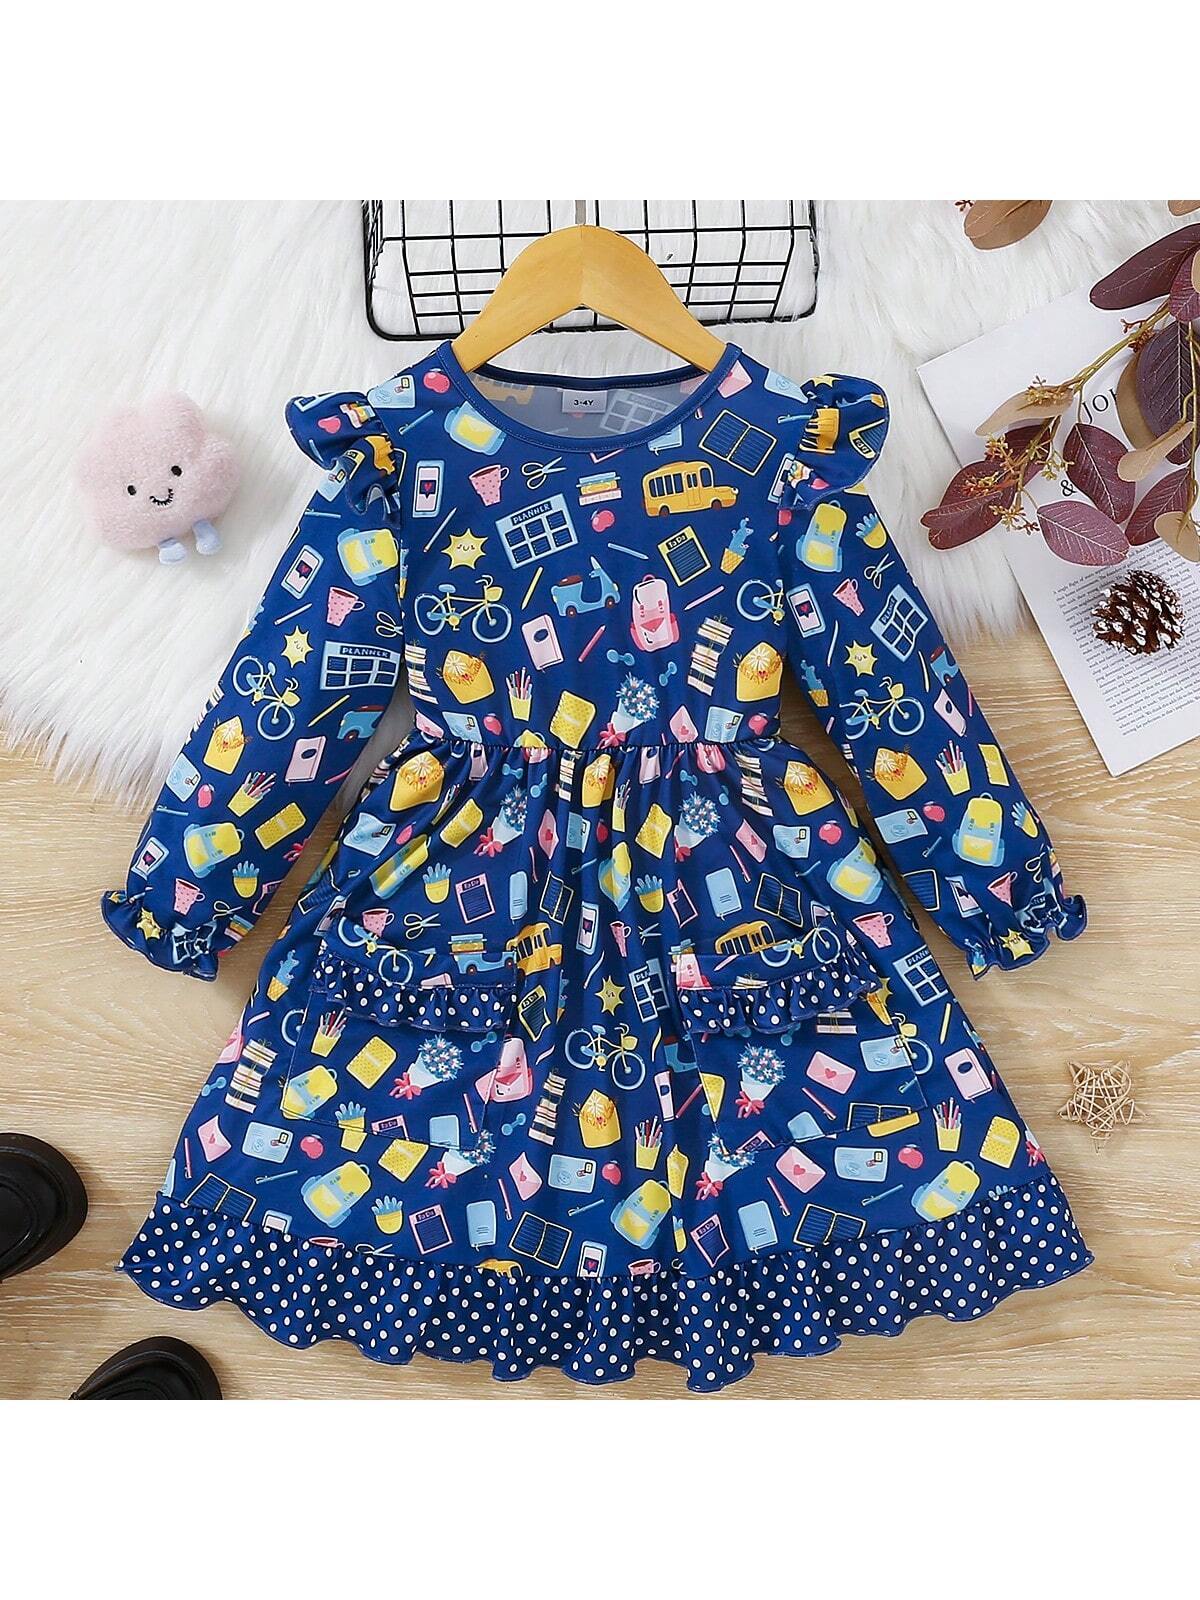 Young Girl Round Neck Long Sleeve Dress With Lace Panel And Hand-Drawn Pattern